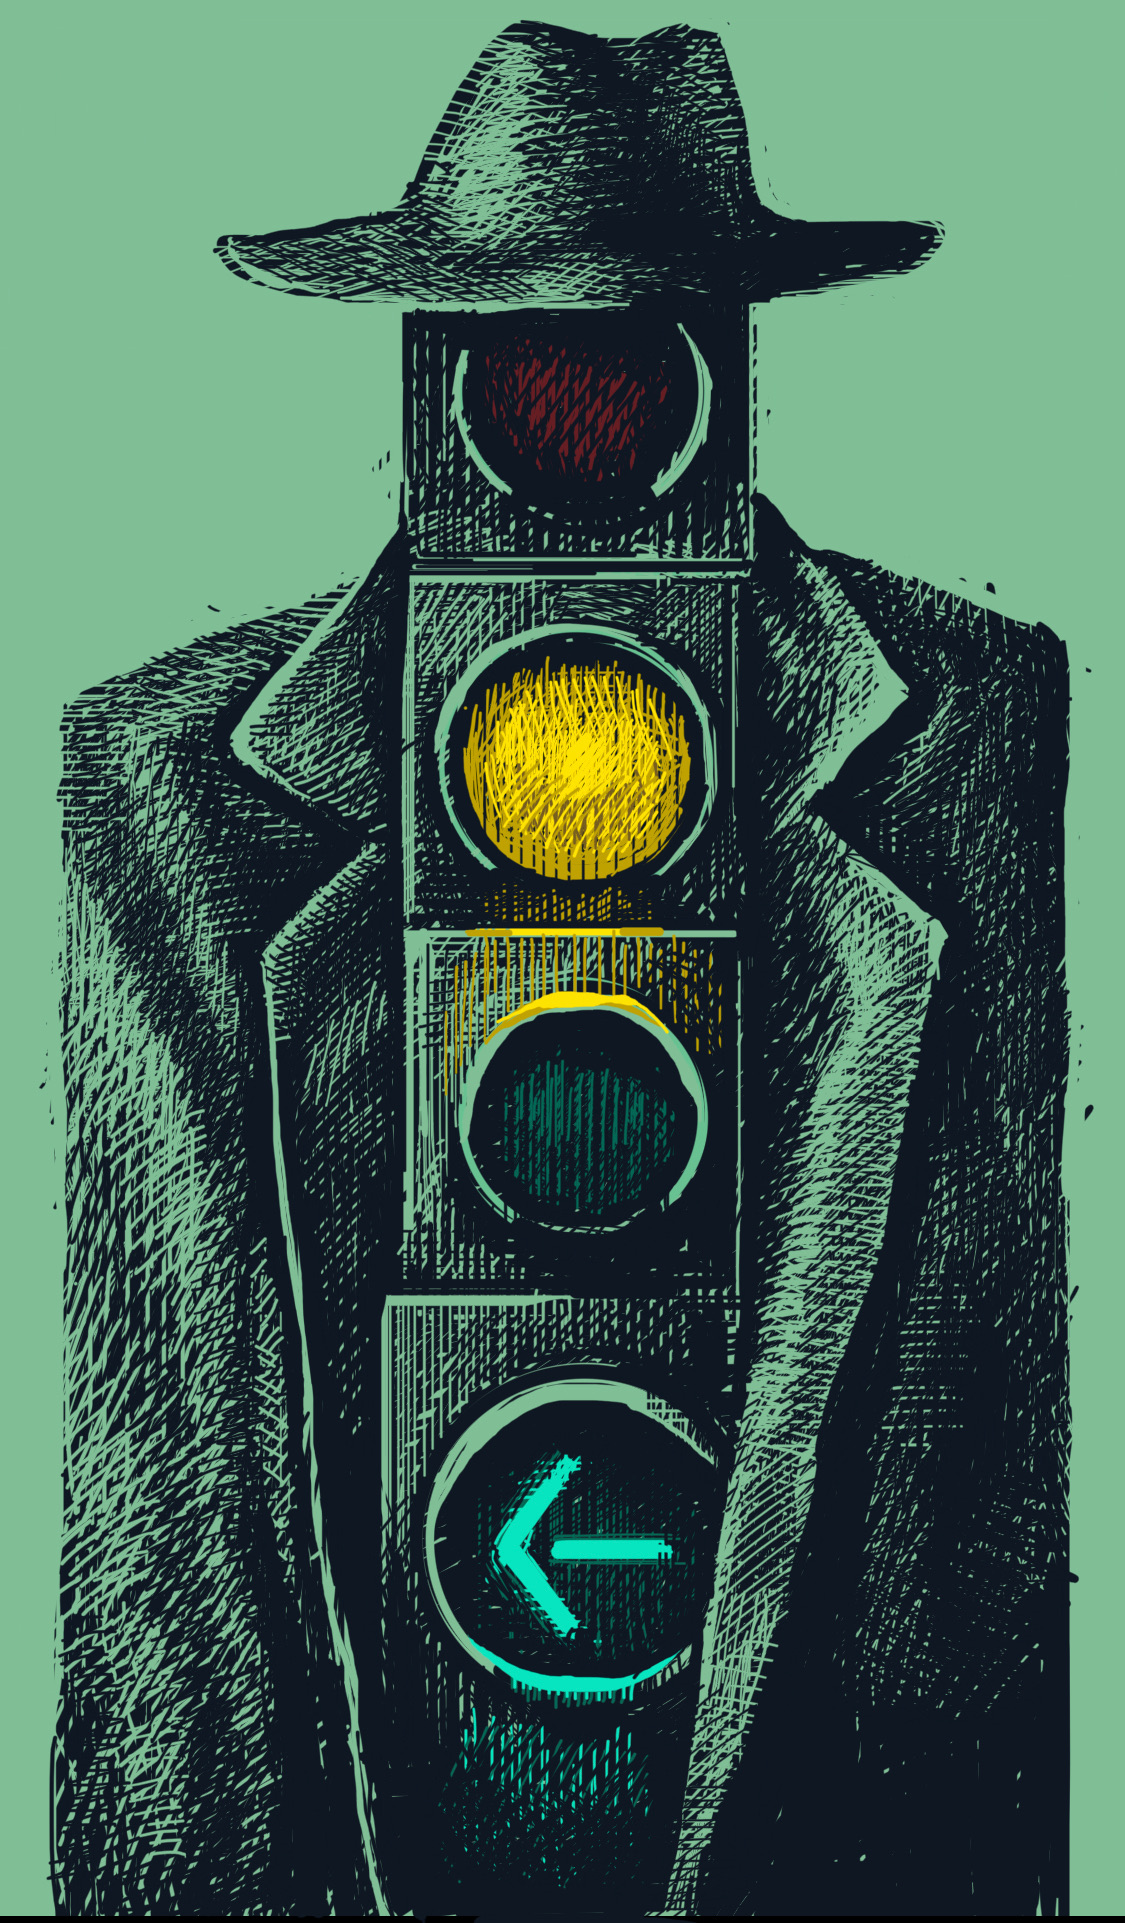 A person wearing a hat and a long trench coat. The person is a traffic signal with the green left arrow and orange lights lit.